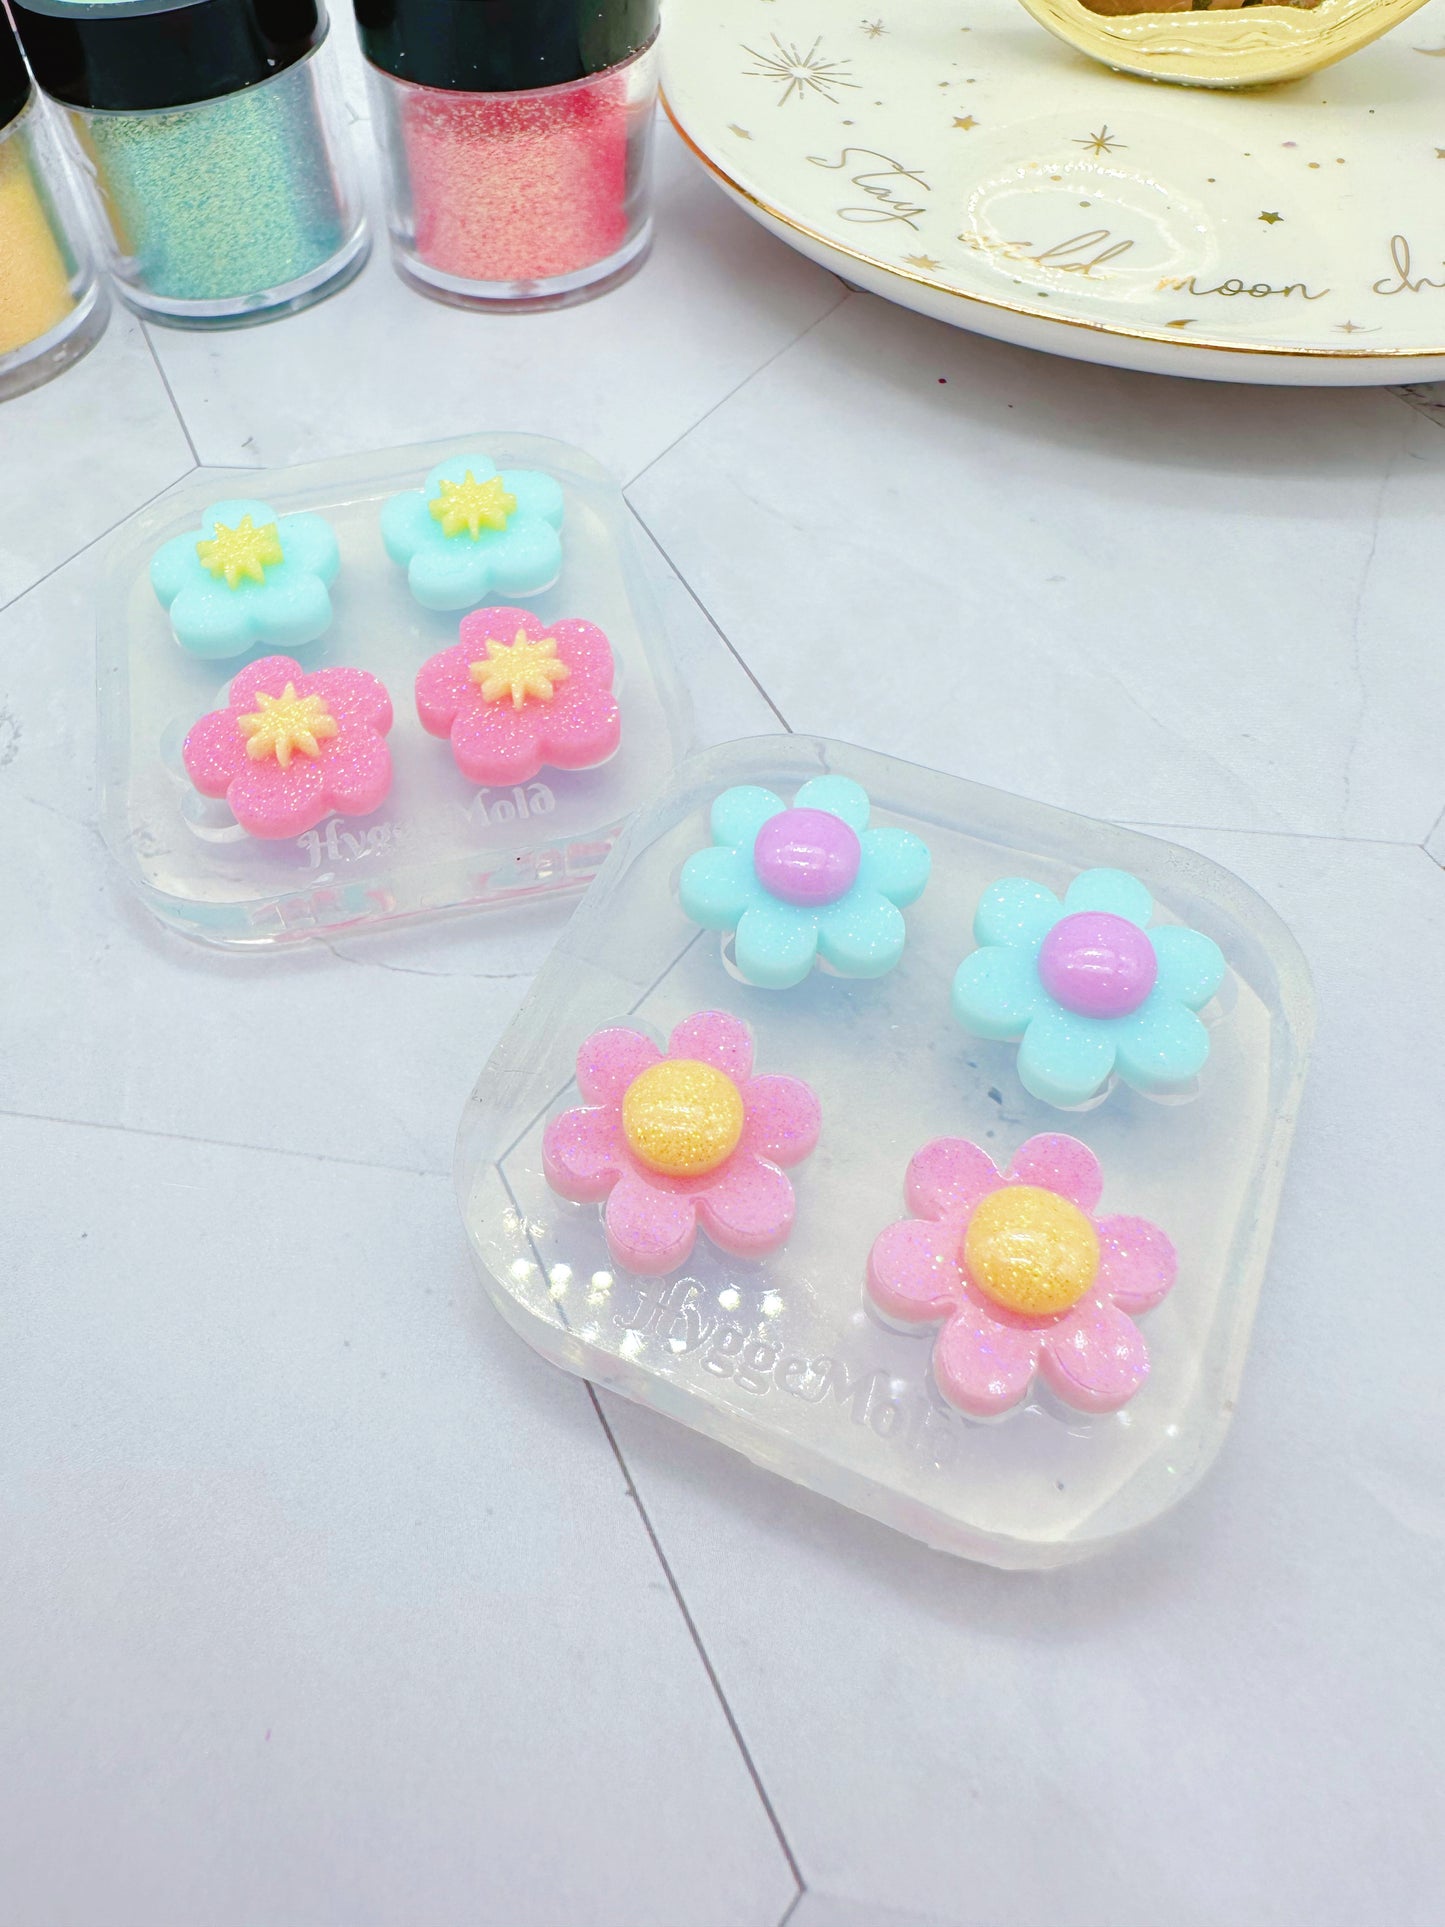 Mini Flower with domed centre Stud Earring Mold